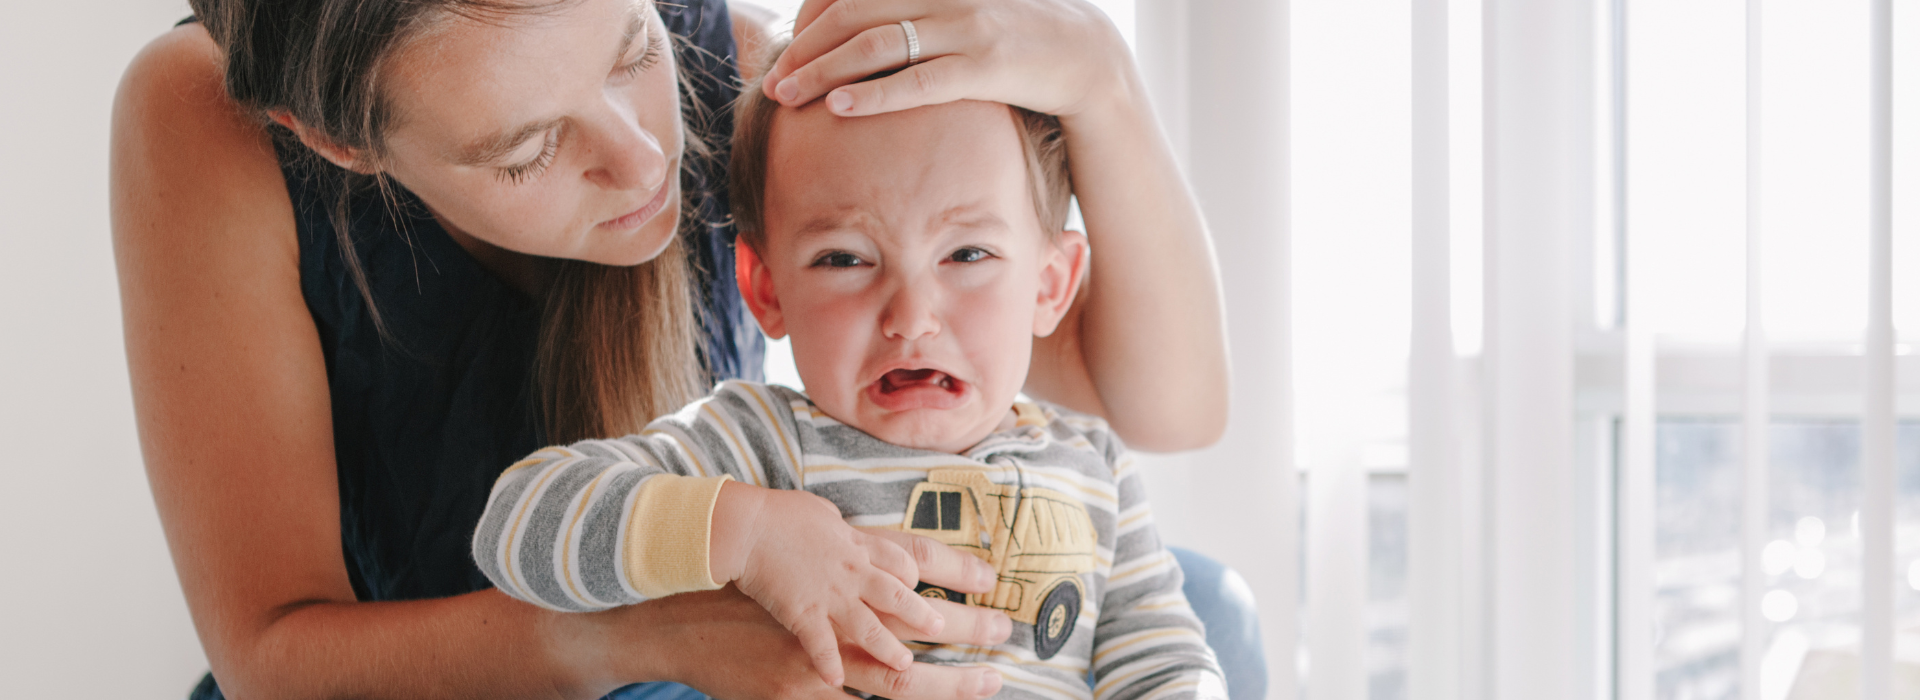 From Defcon 1 to Calm: Navigating Tantrums with Love and Patience